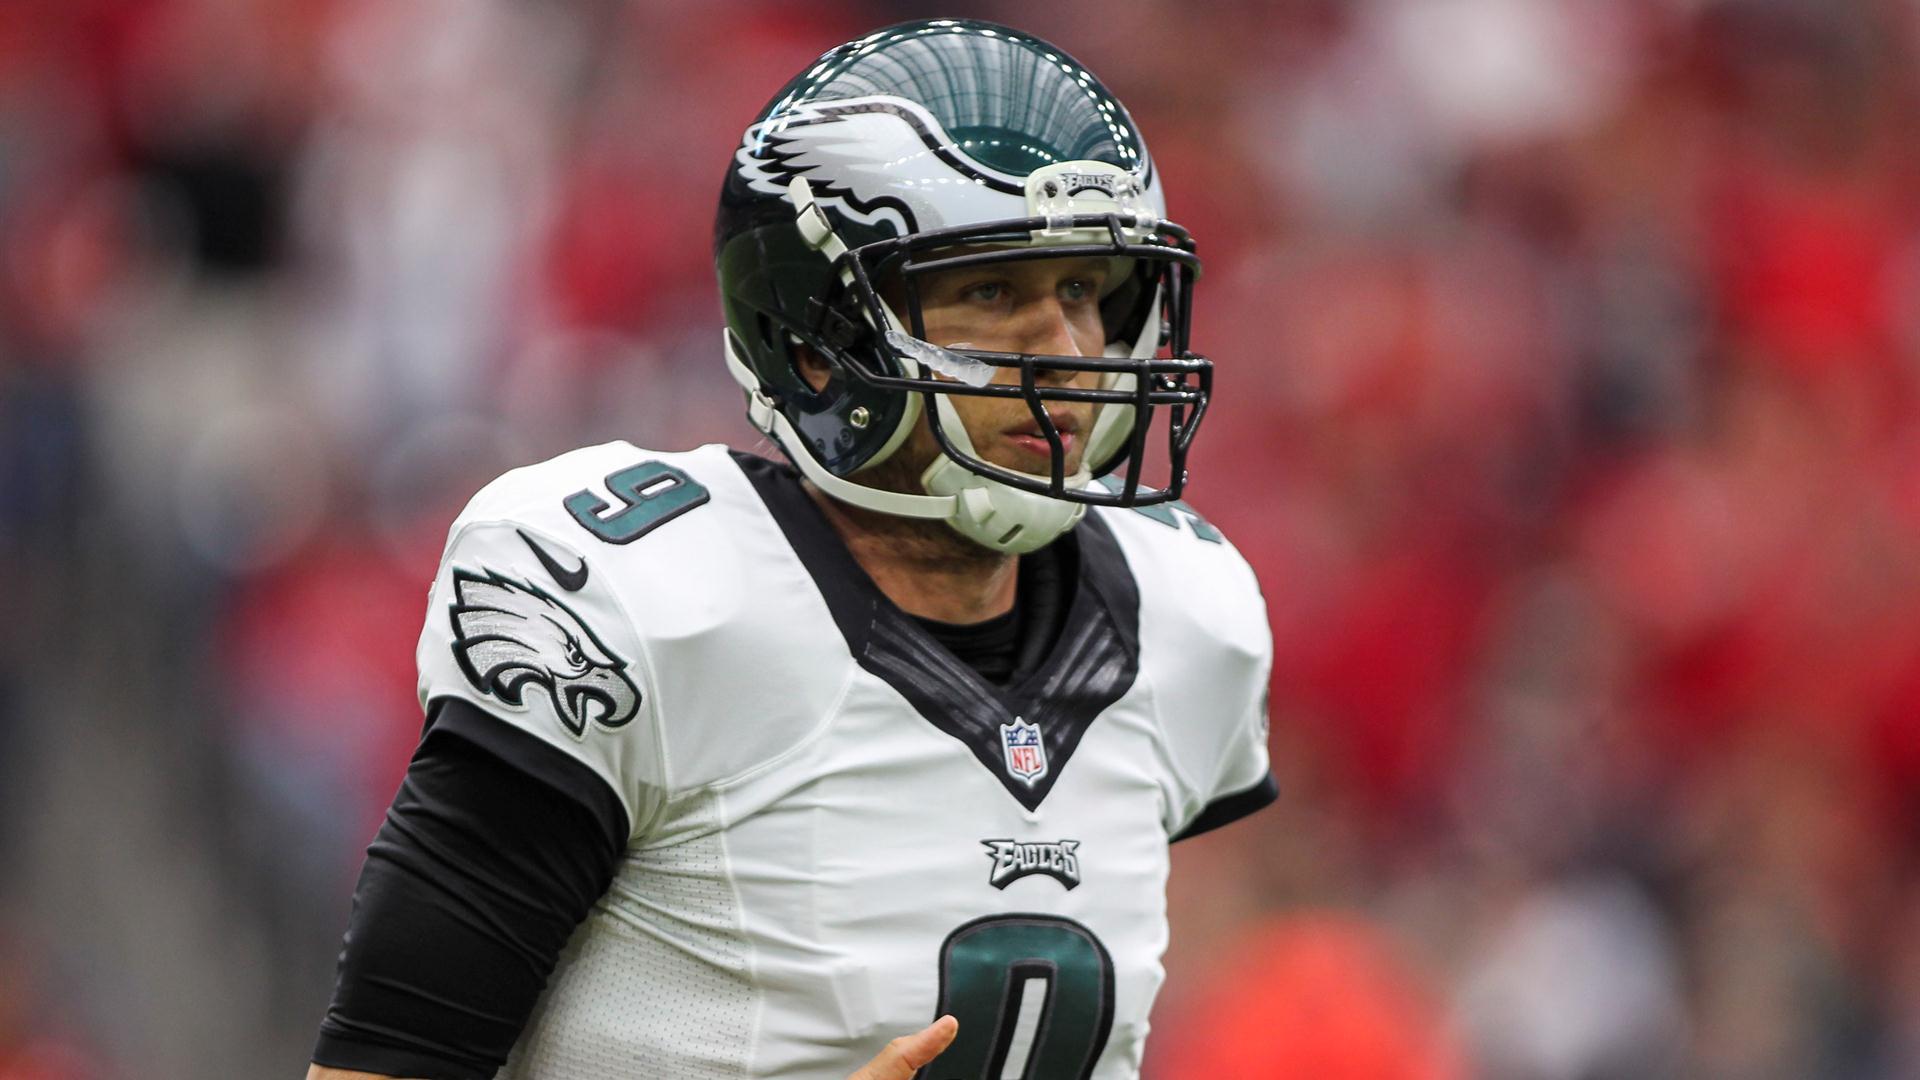 Reuben Frank on Nick Foles: 'There's not a lot of guys I'd rather